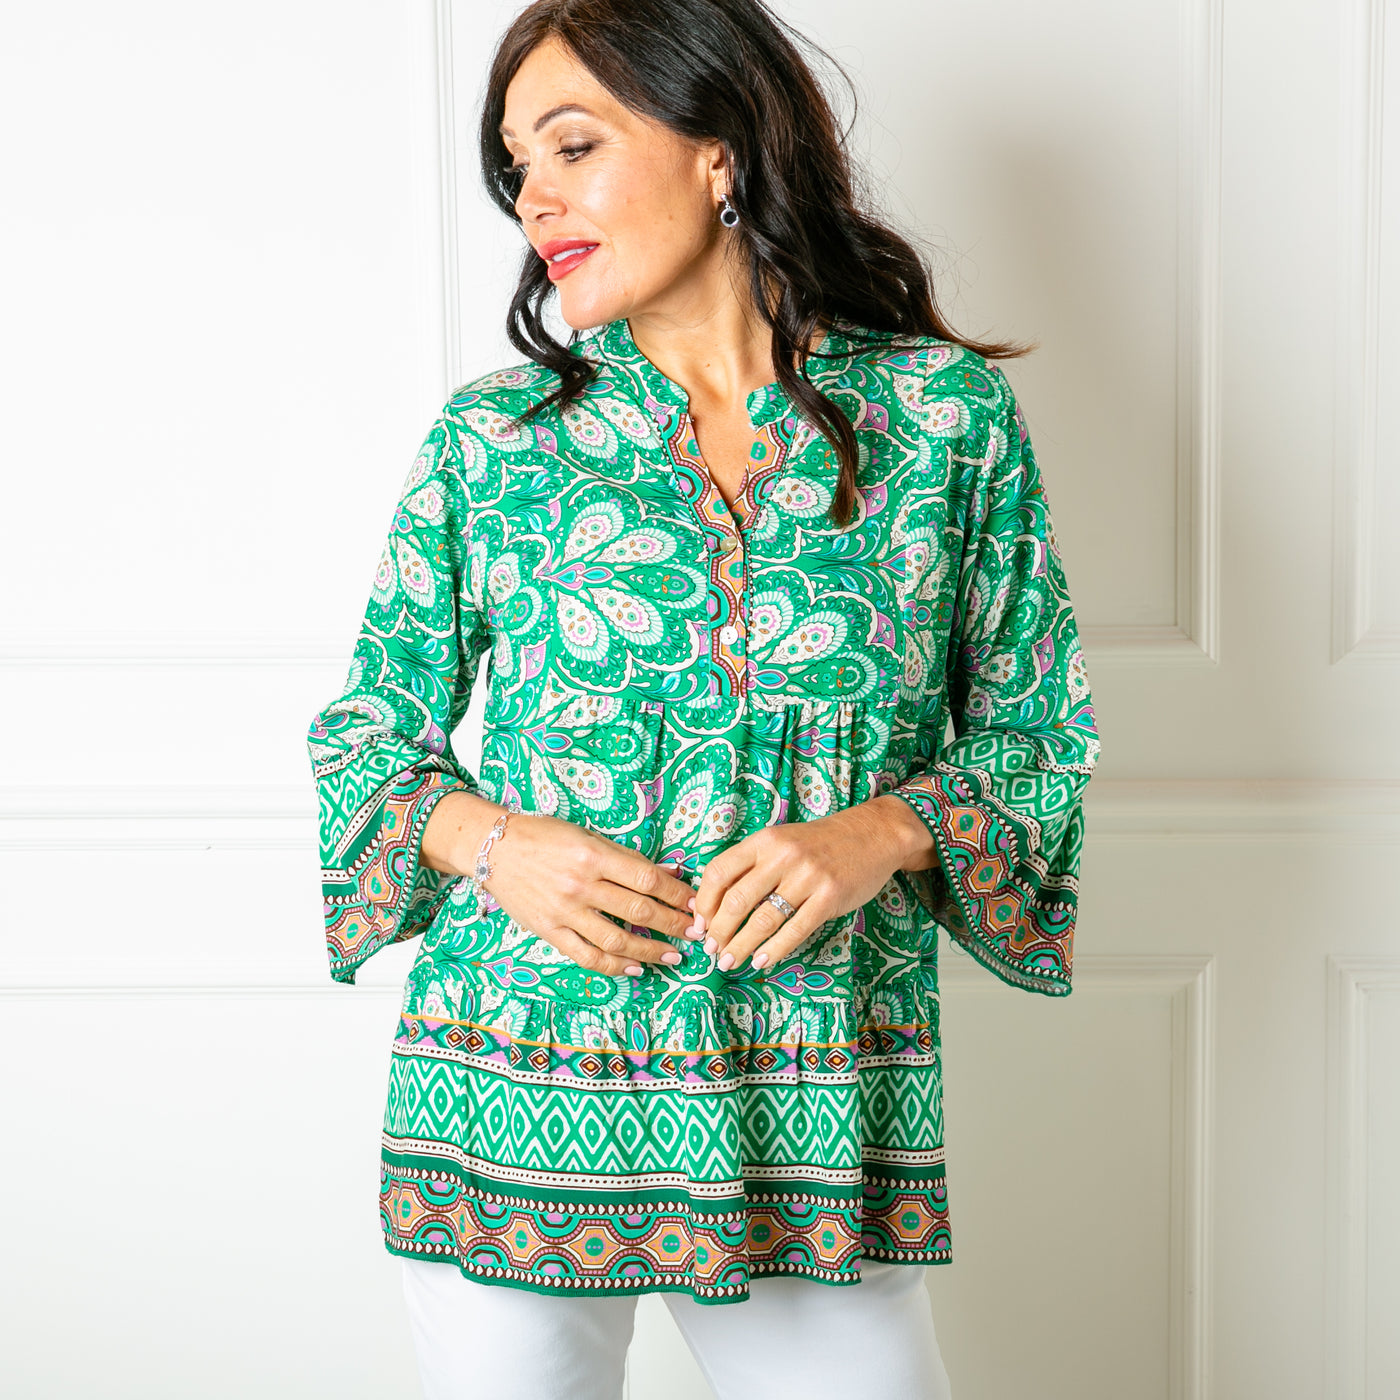 The green Paisley Blouse with 3/4 length sleeves that are flared at the elbow